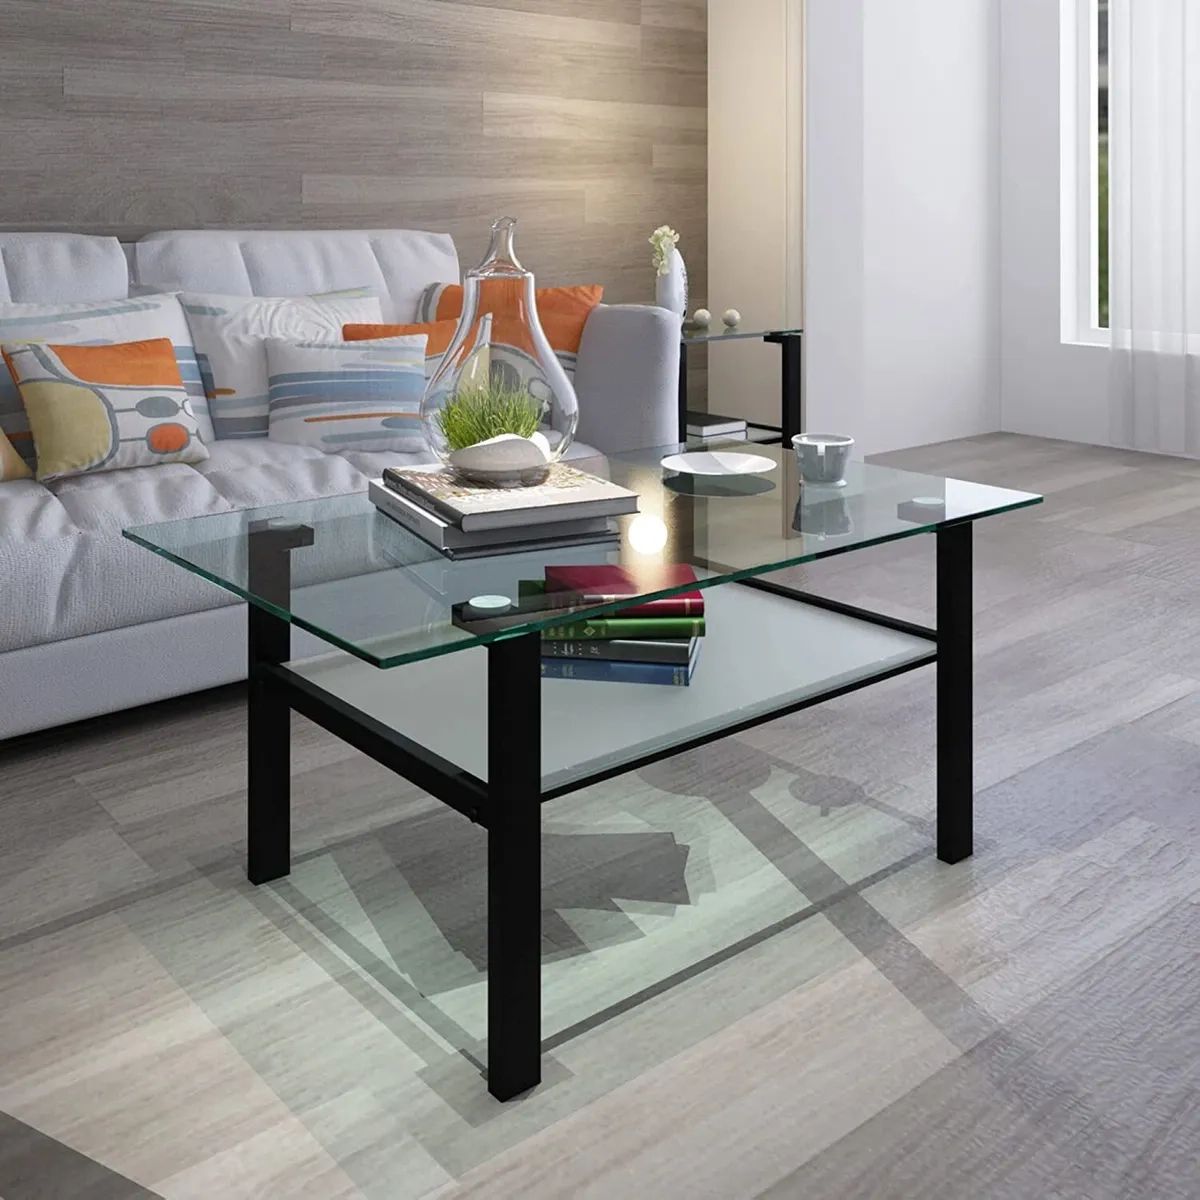 Tempered Glass Coffee Table With Metal Legs Modern Small Coffee Table For  Living | Ebay For Coffee Tables With Metal Legs (View 9 of 15)